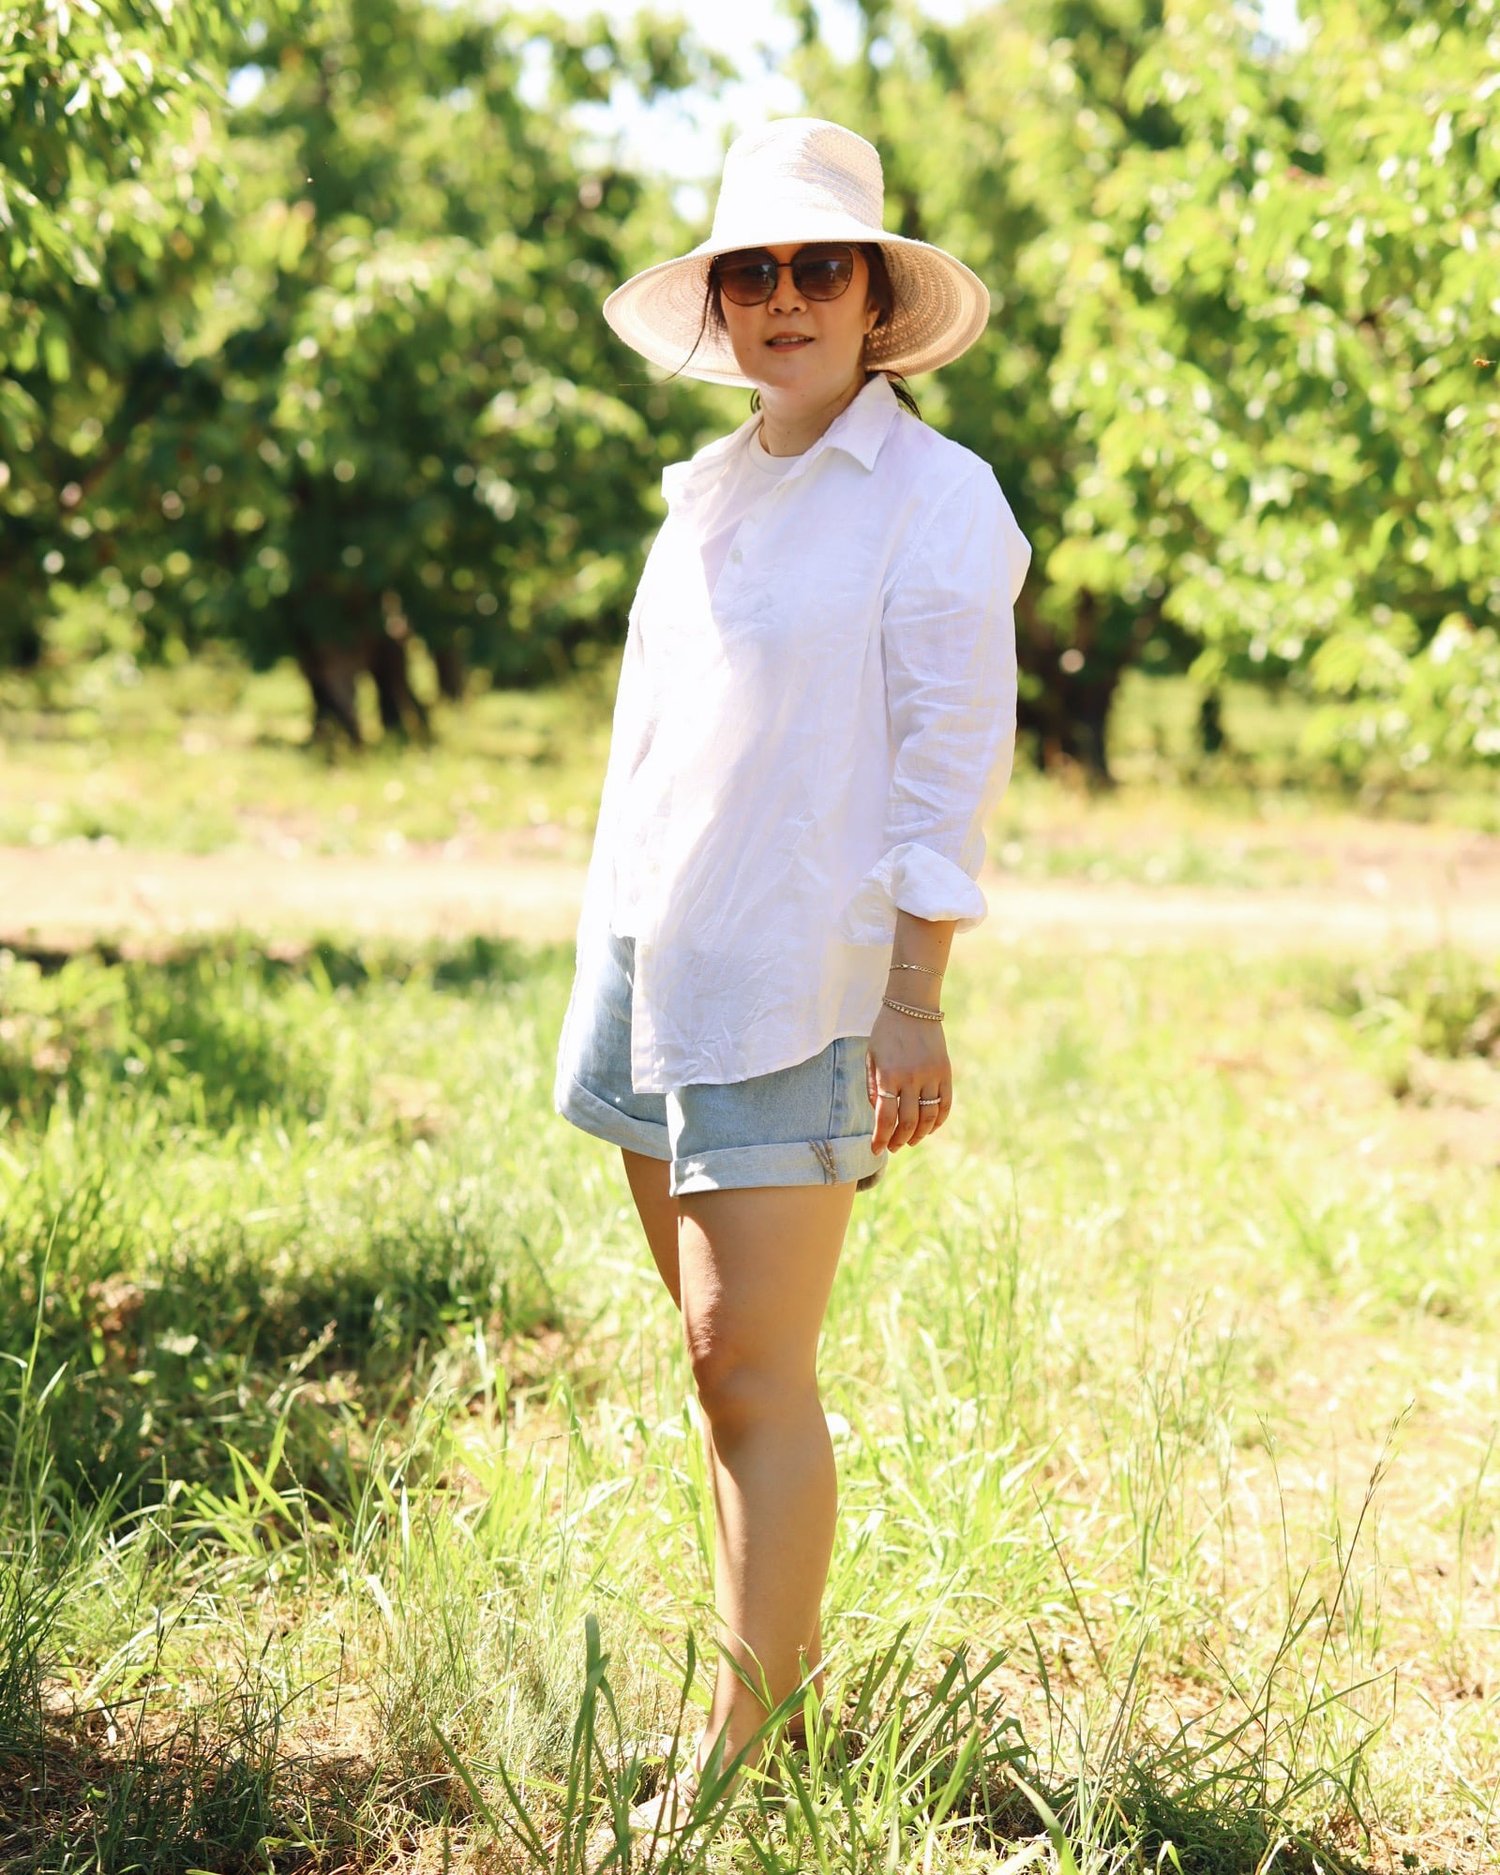 Sets Appeal: A Review of Almost Every Linen Top and Bottom from Quince